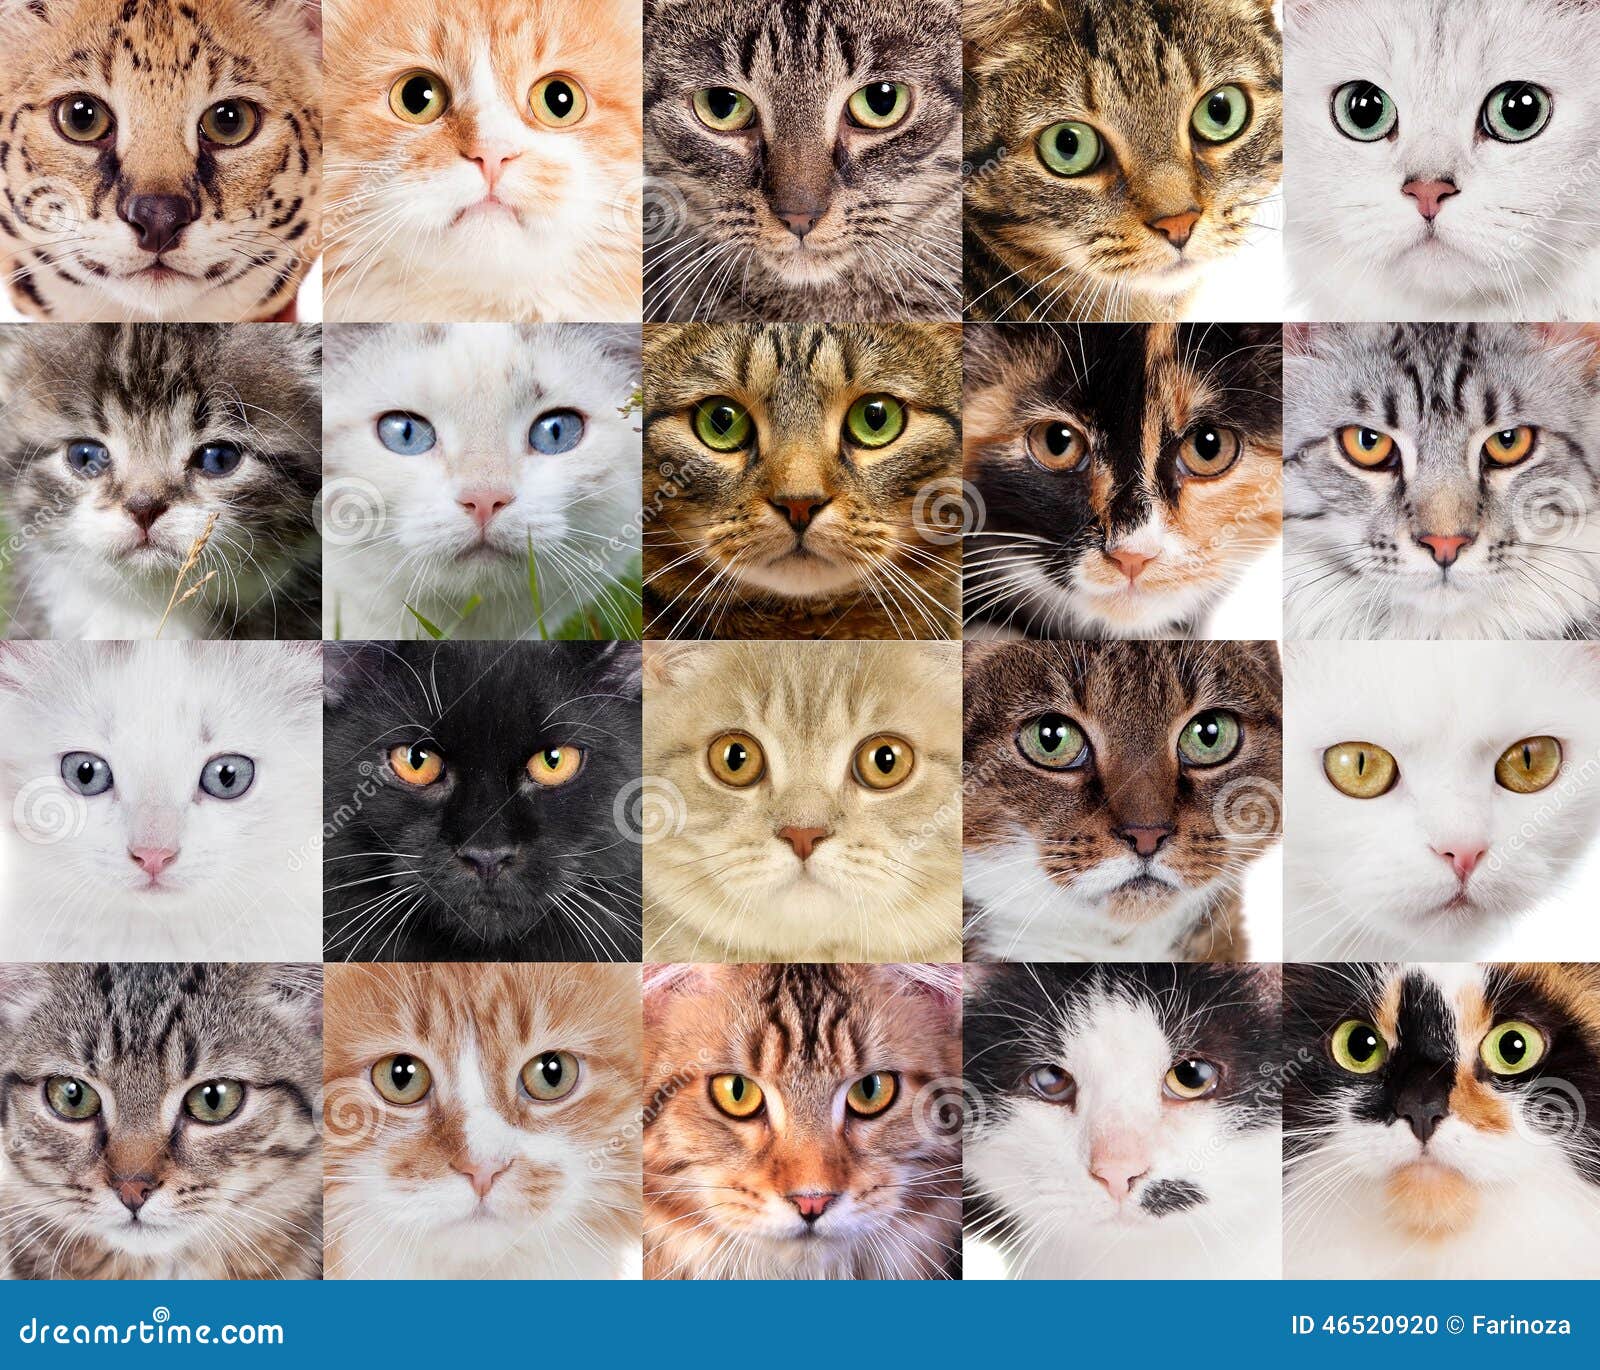 collage-different-cute-cats-many-faces-46520920.jpg